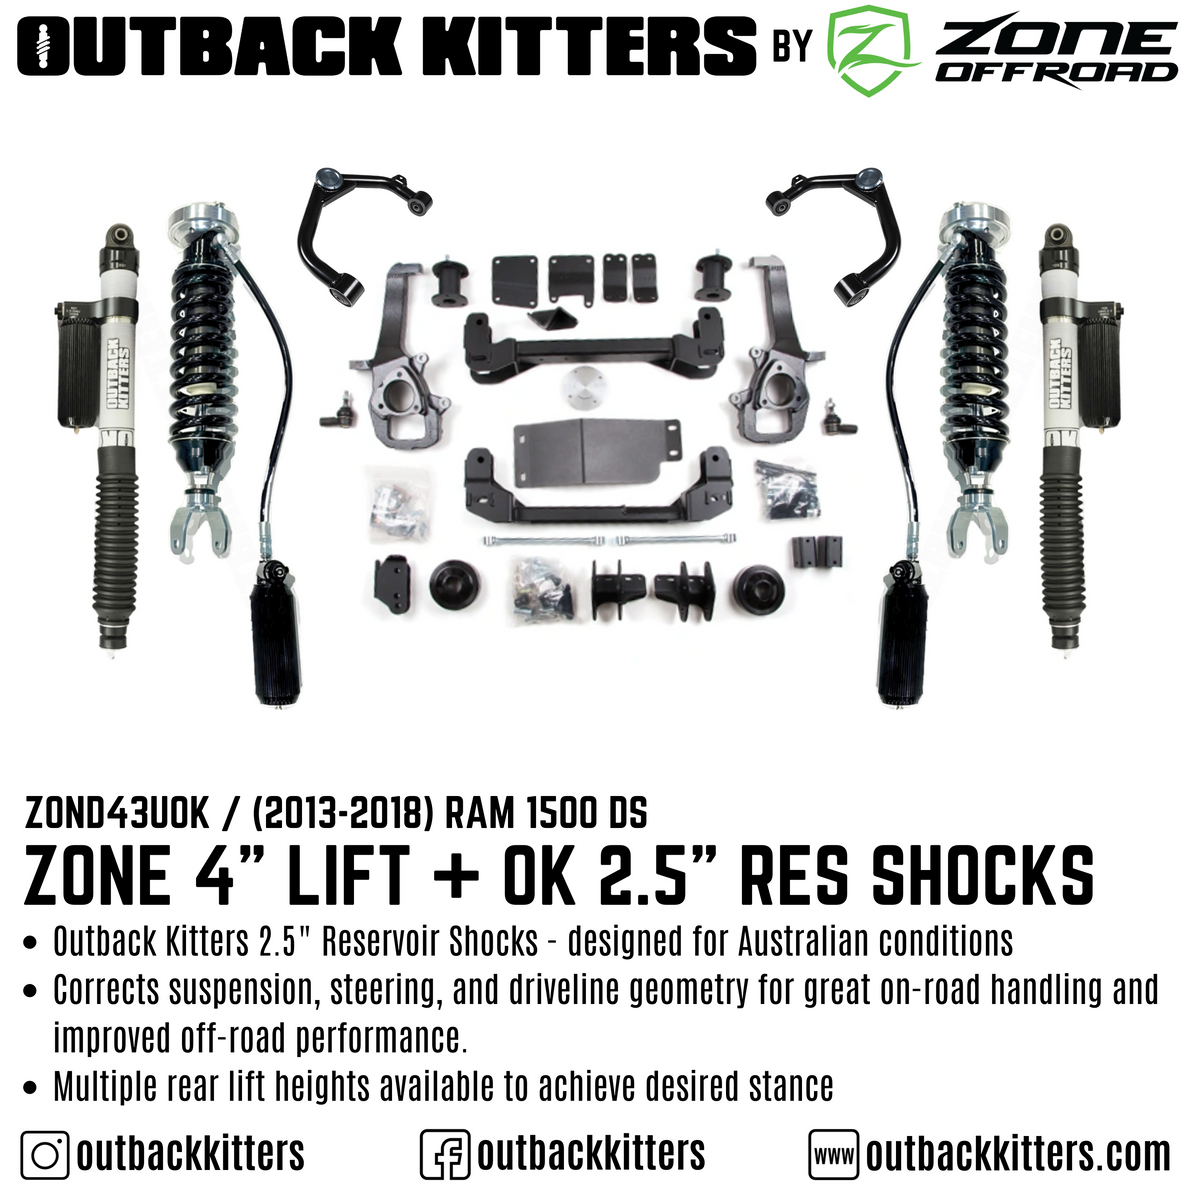 OK by Zone Offroad 4" Lift Kit for 2013-2018 Ram 1500 DS - Outback Kitters